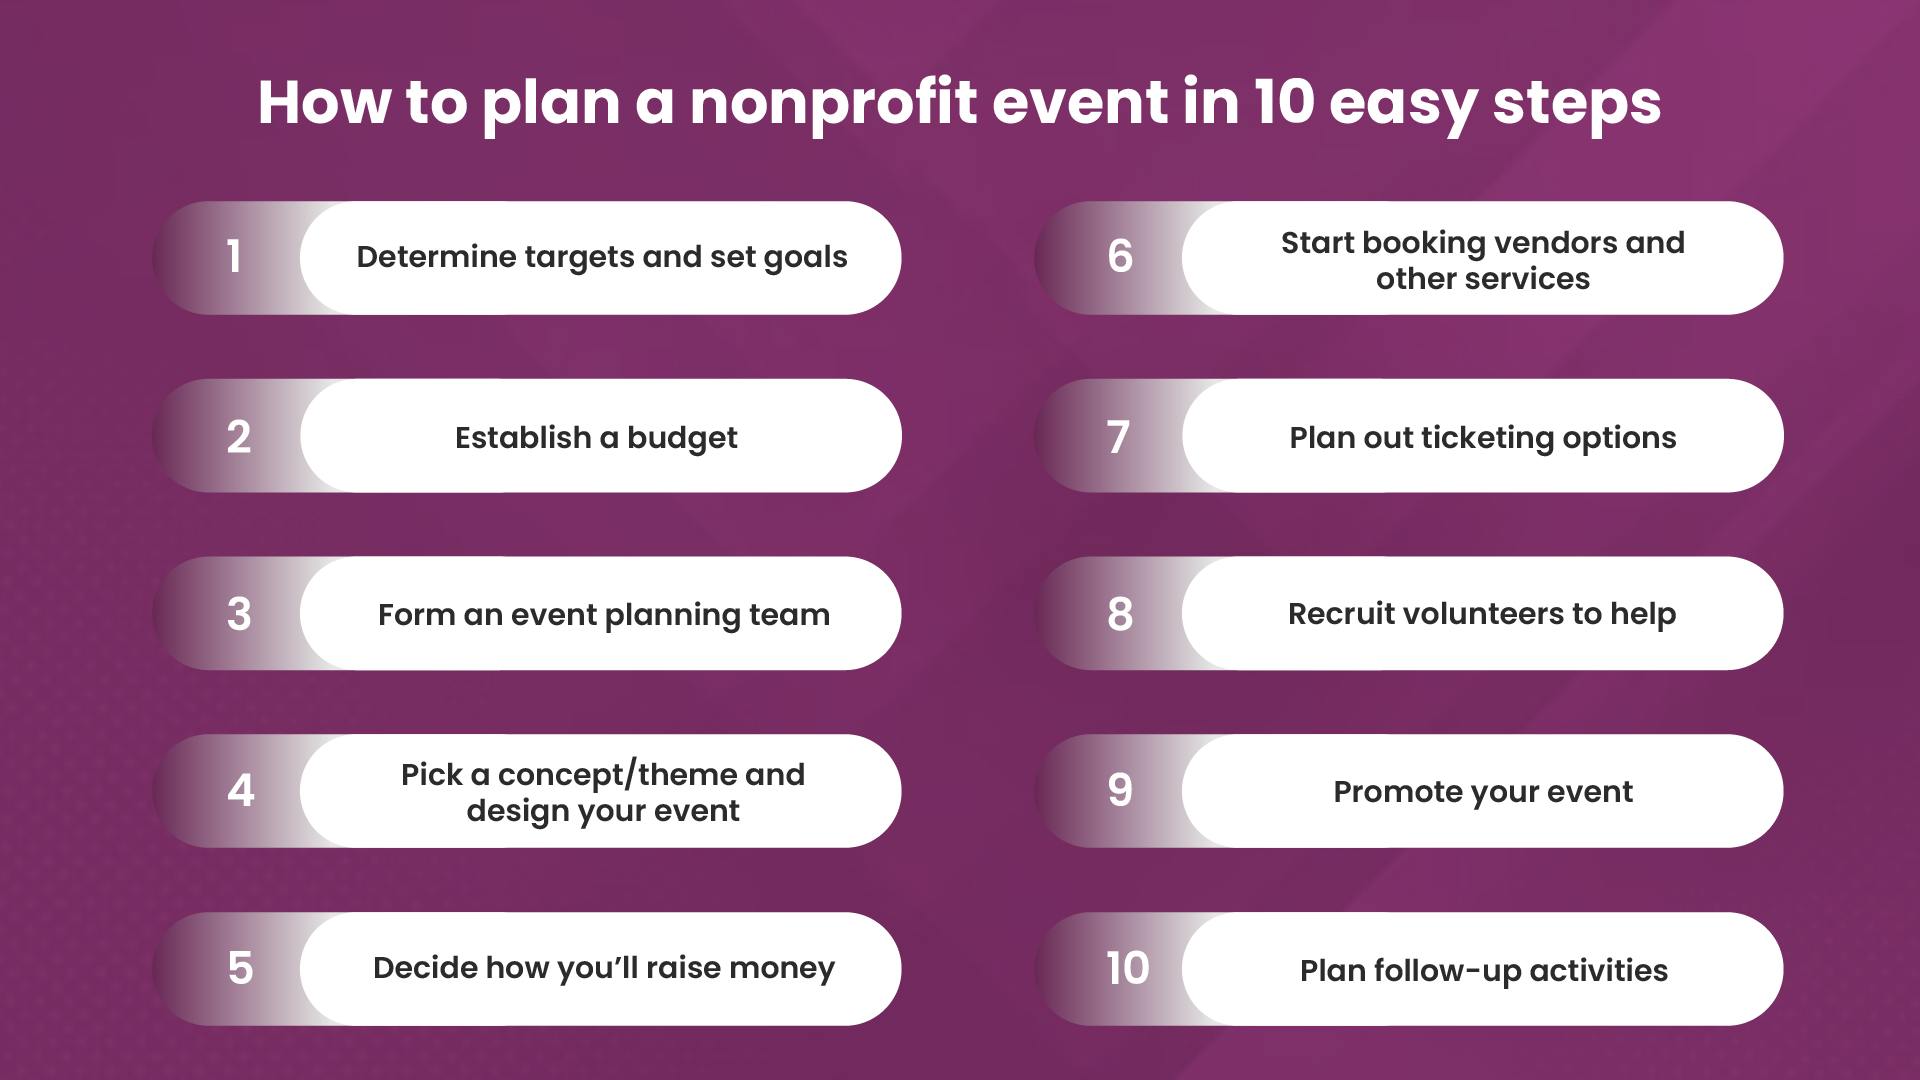 How to plan a nonprofit event in 10 easy steps